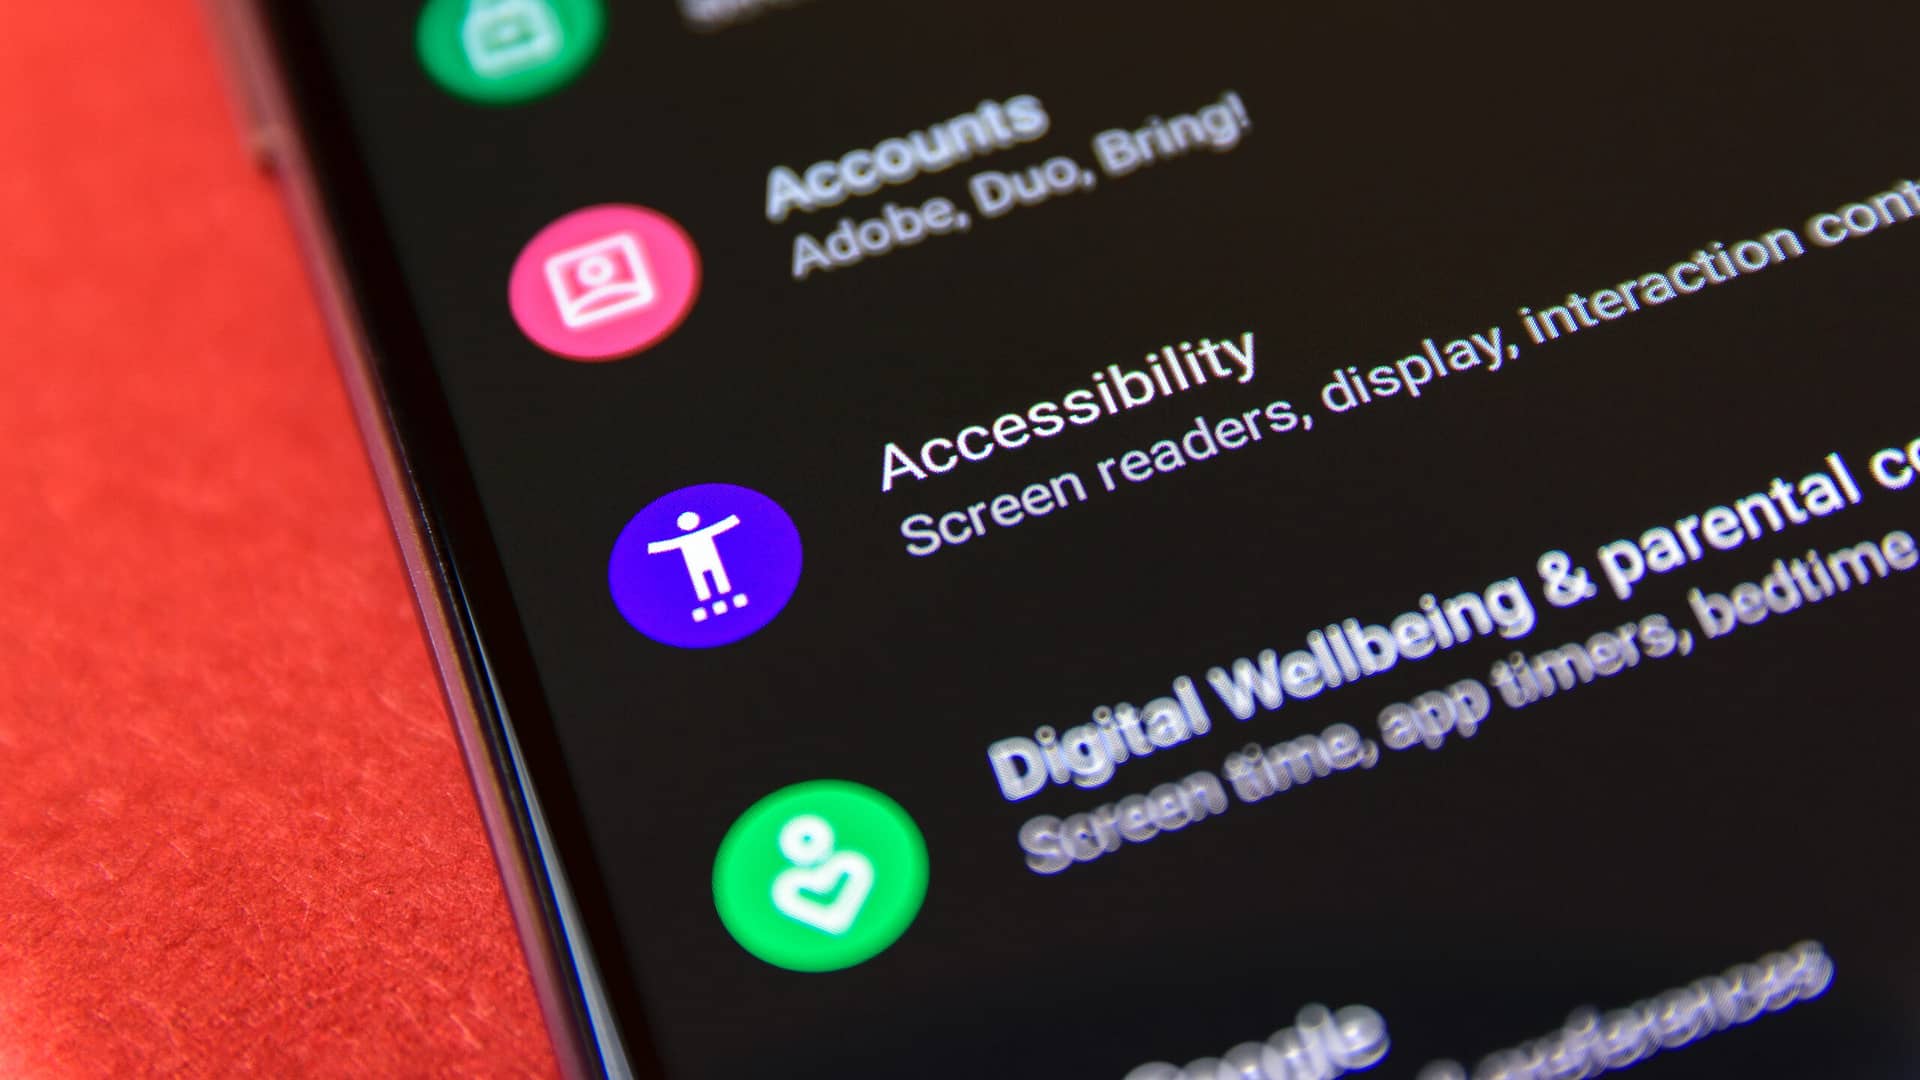 Accessibility in the Android 9 settings menu. Accessibility illustrative editorial.